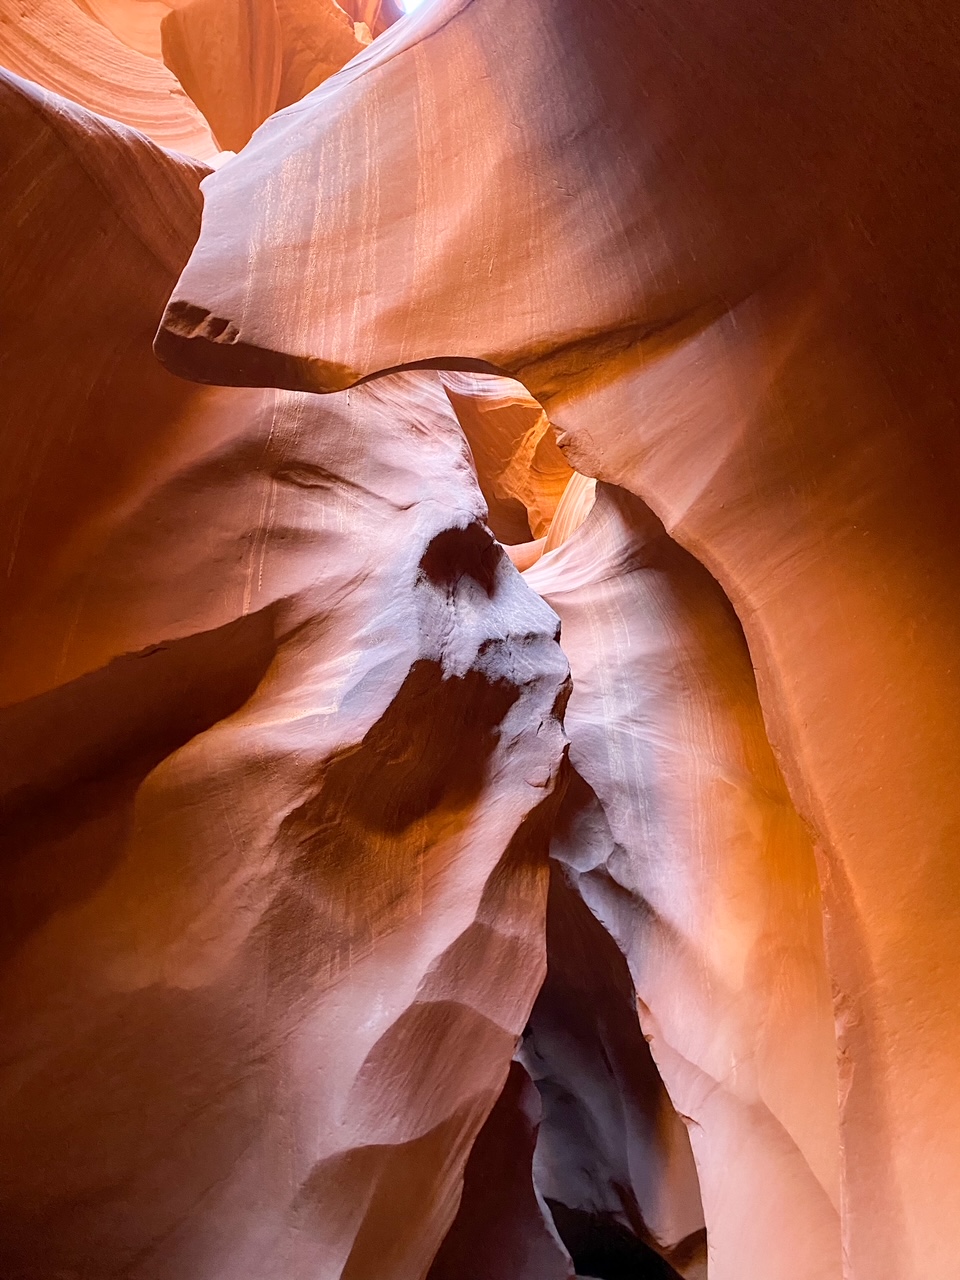 this is said to be a chief at Lower Antelope Canyon